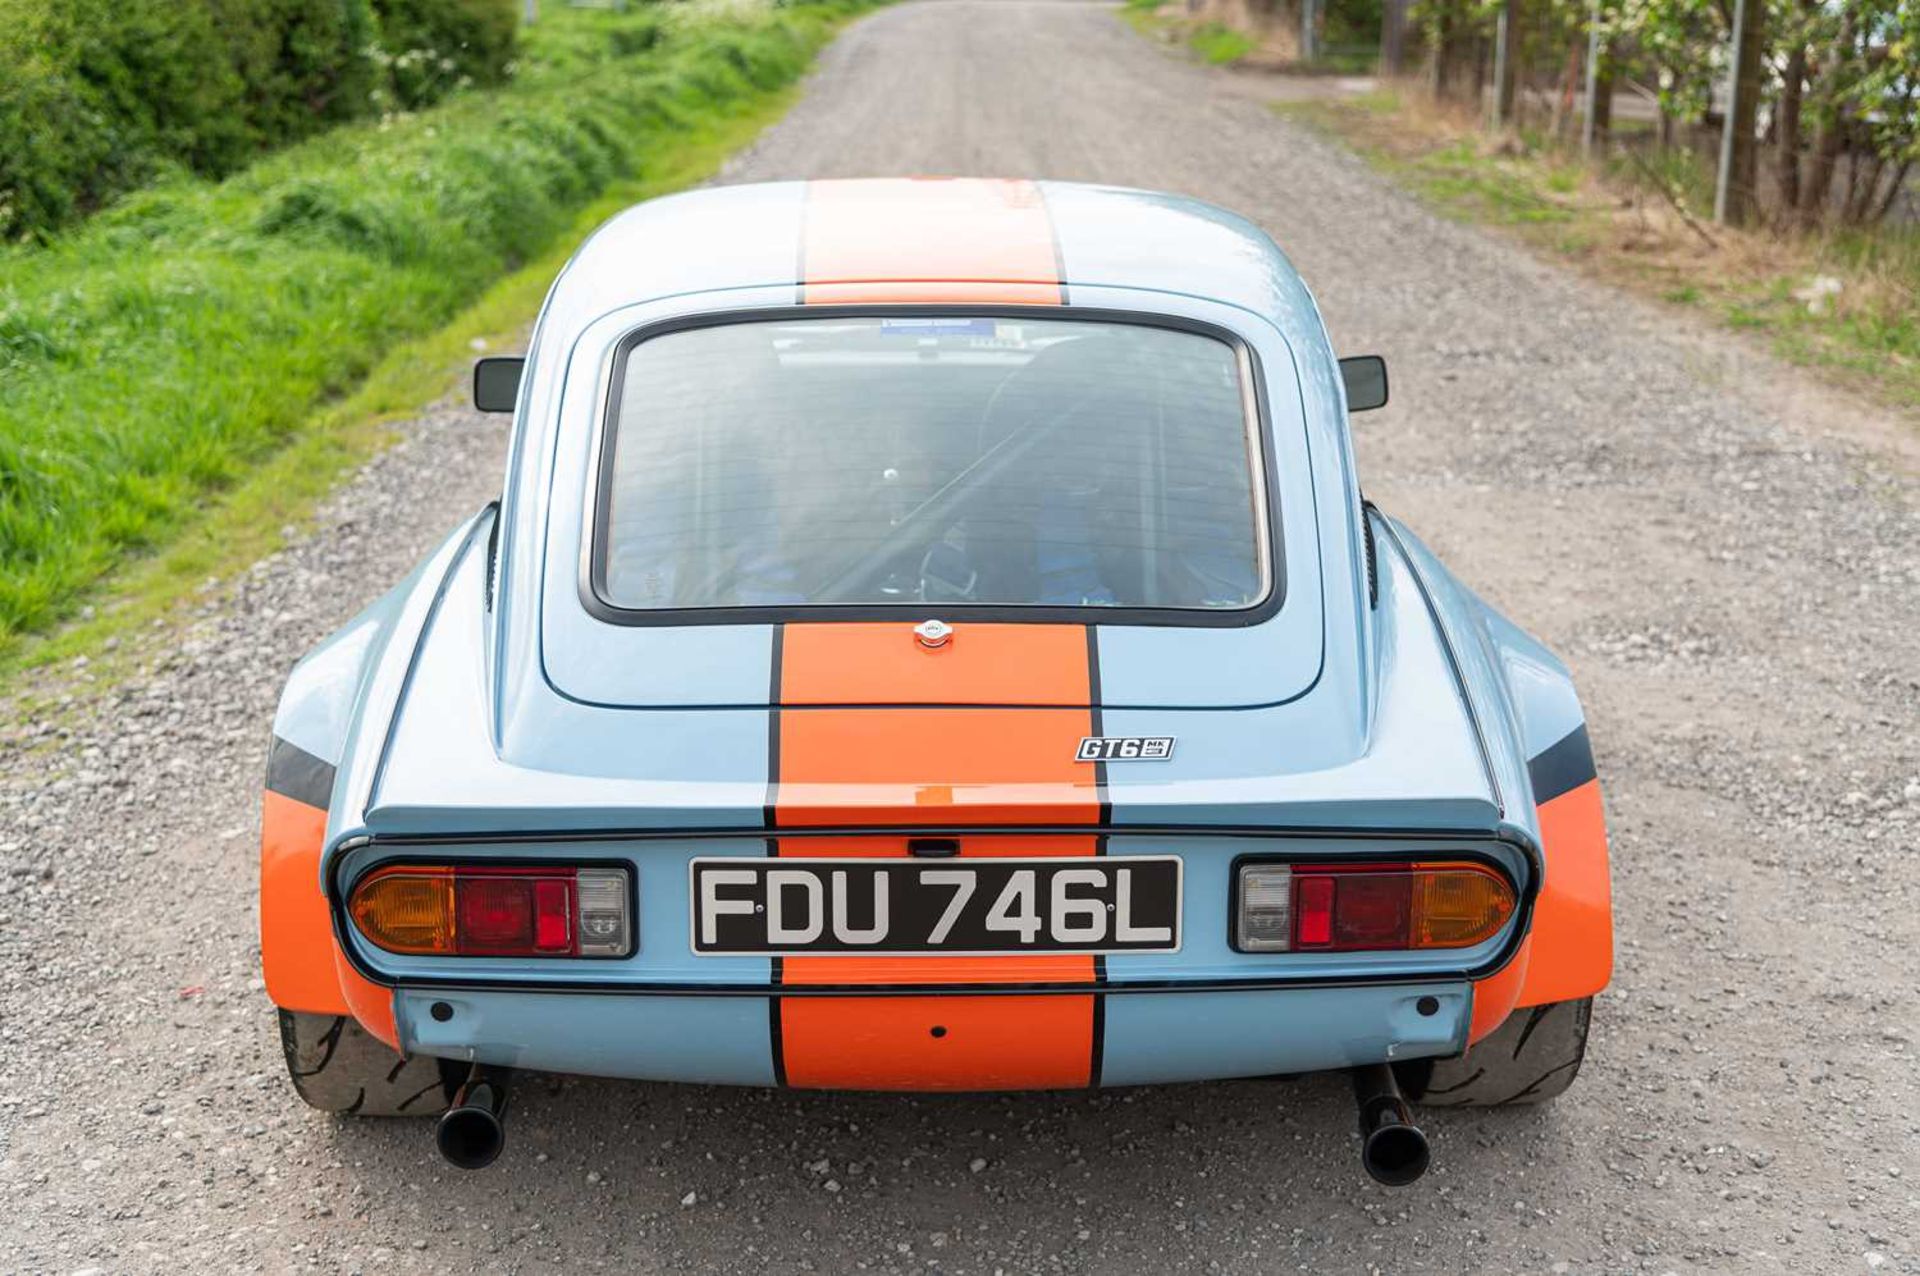 1973 Triumph GT6  ***NO RESERVE*** Presented in Gulf Racing-inspired paintwork, road-going track wea - Image 12 of 65